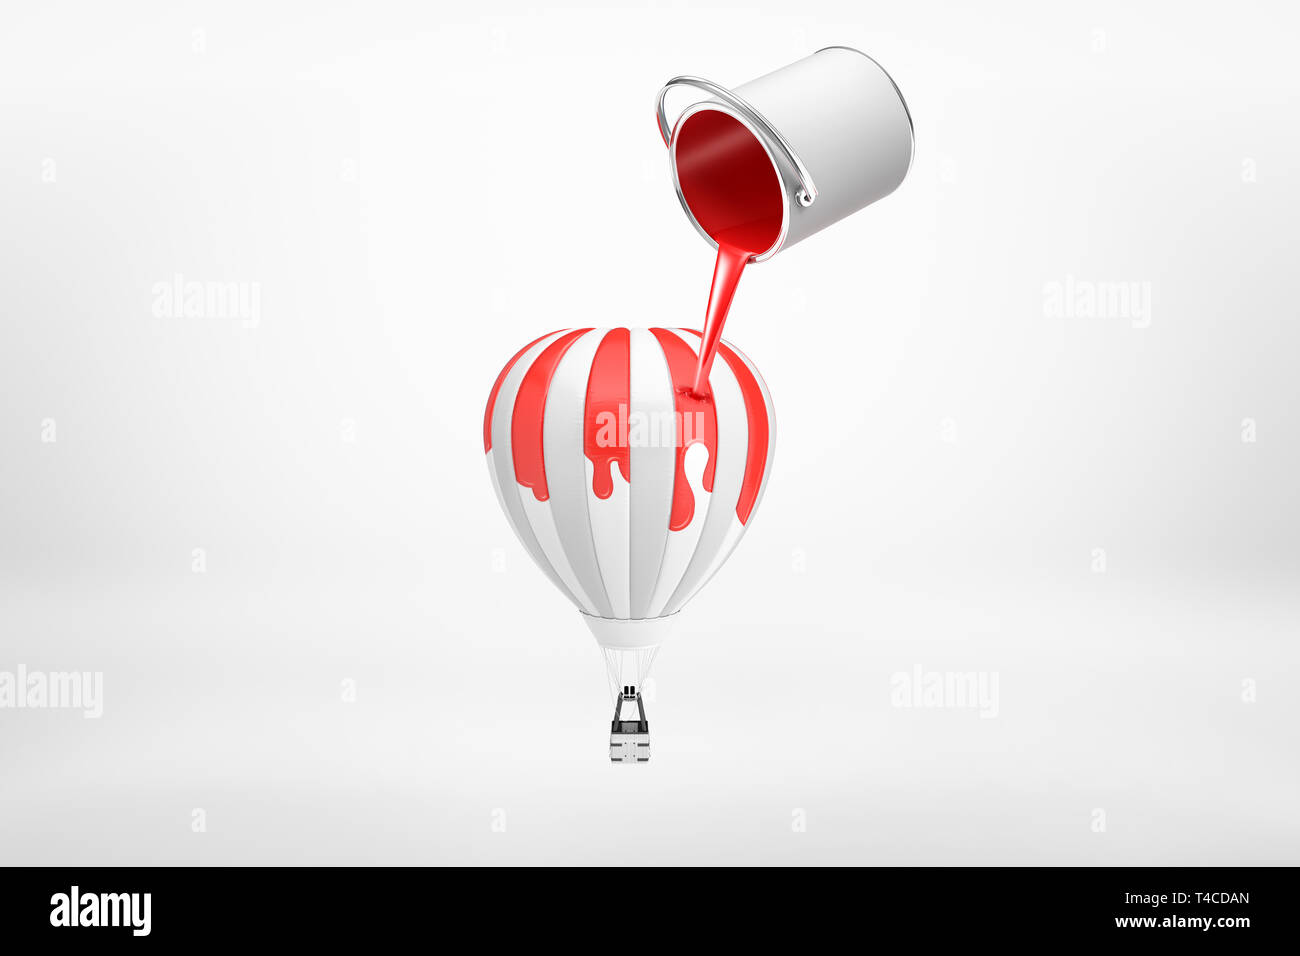 3d rendering of small silver paint bucket turned upside down with red paint pouring on hot air balloon isolated on white background Stock Photo